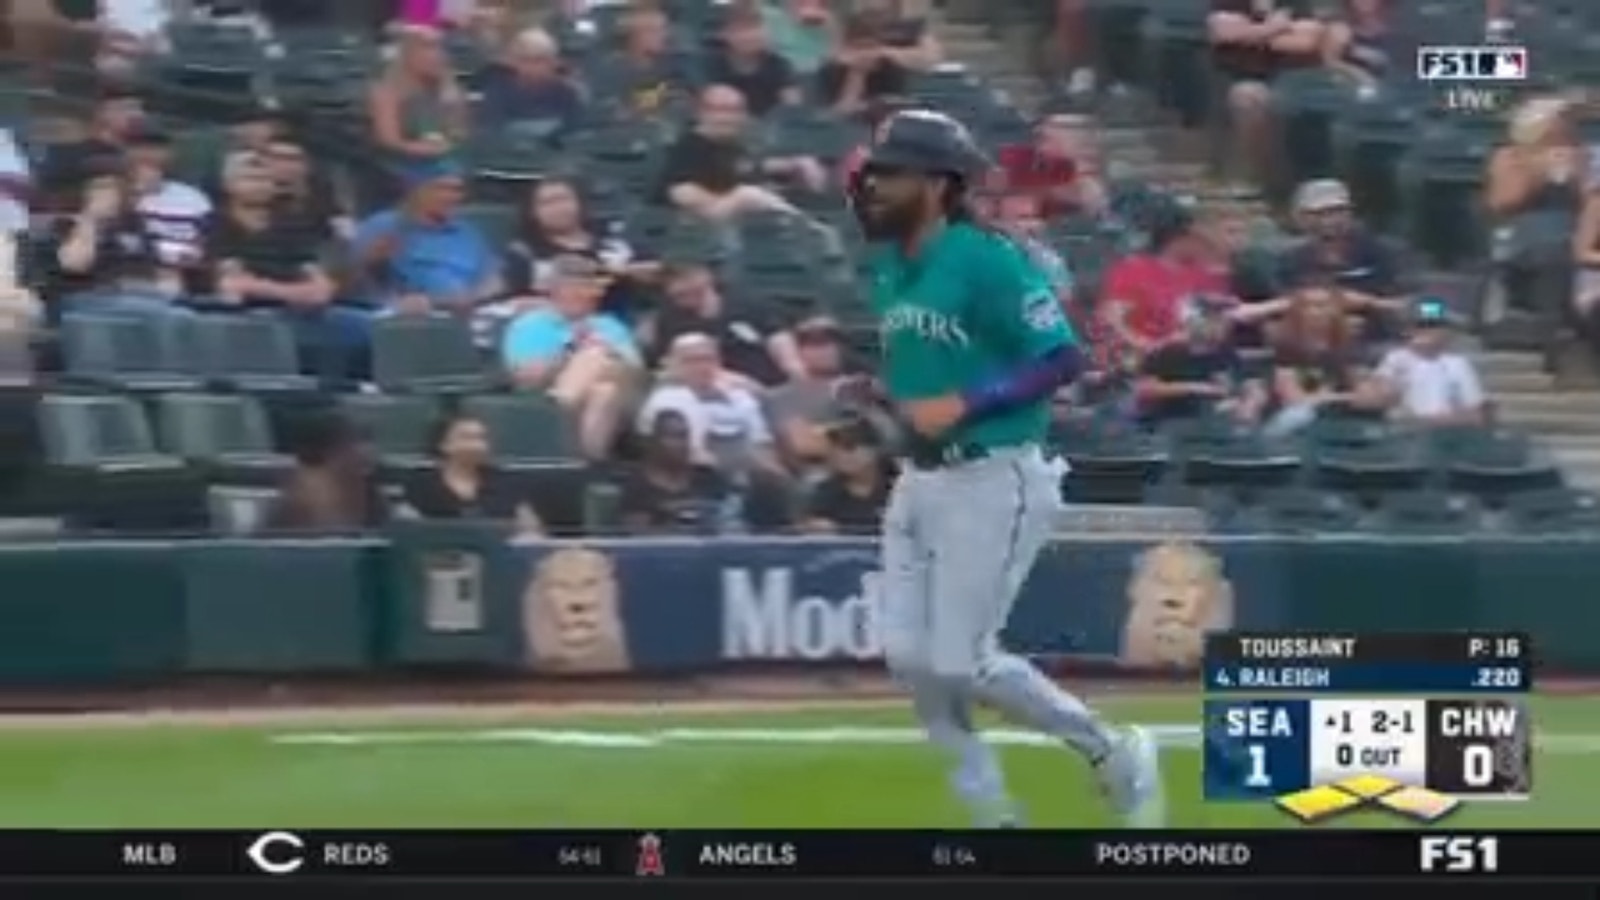 Mariners put up five first-inning runs vs. White Sox